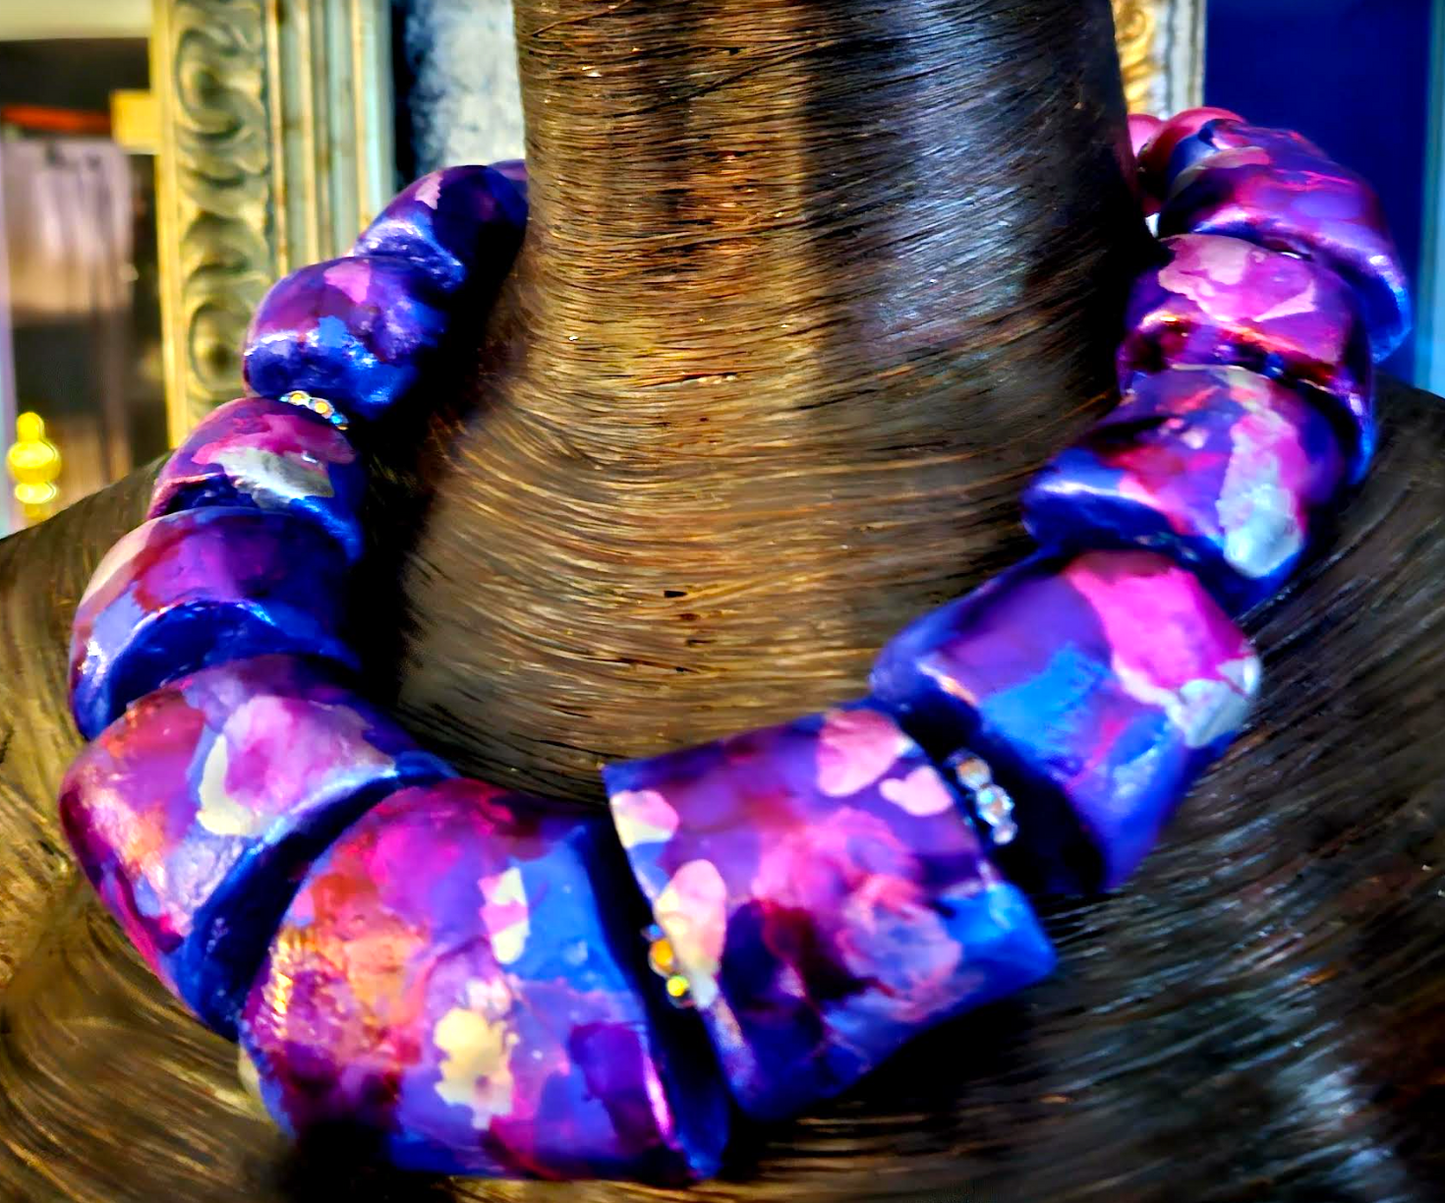 Statement Necklace Hand Sculpted Oversized Beaded Pink Purple Silver Jewelry Haute Couture OOAK Wearable Art